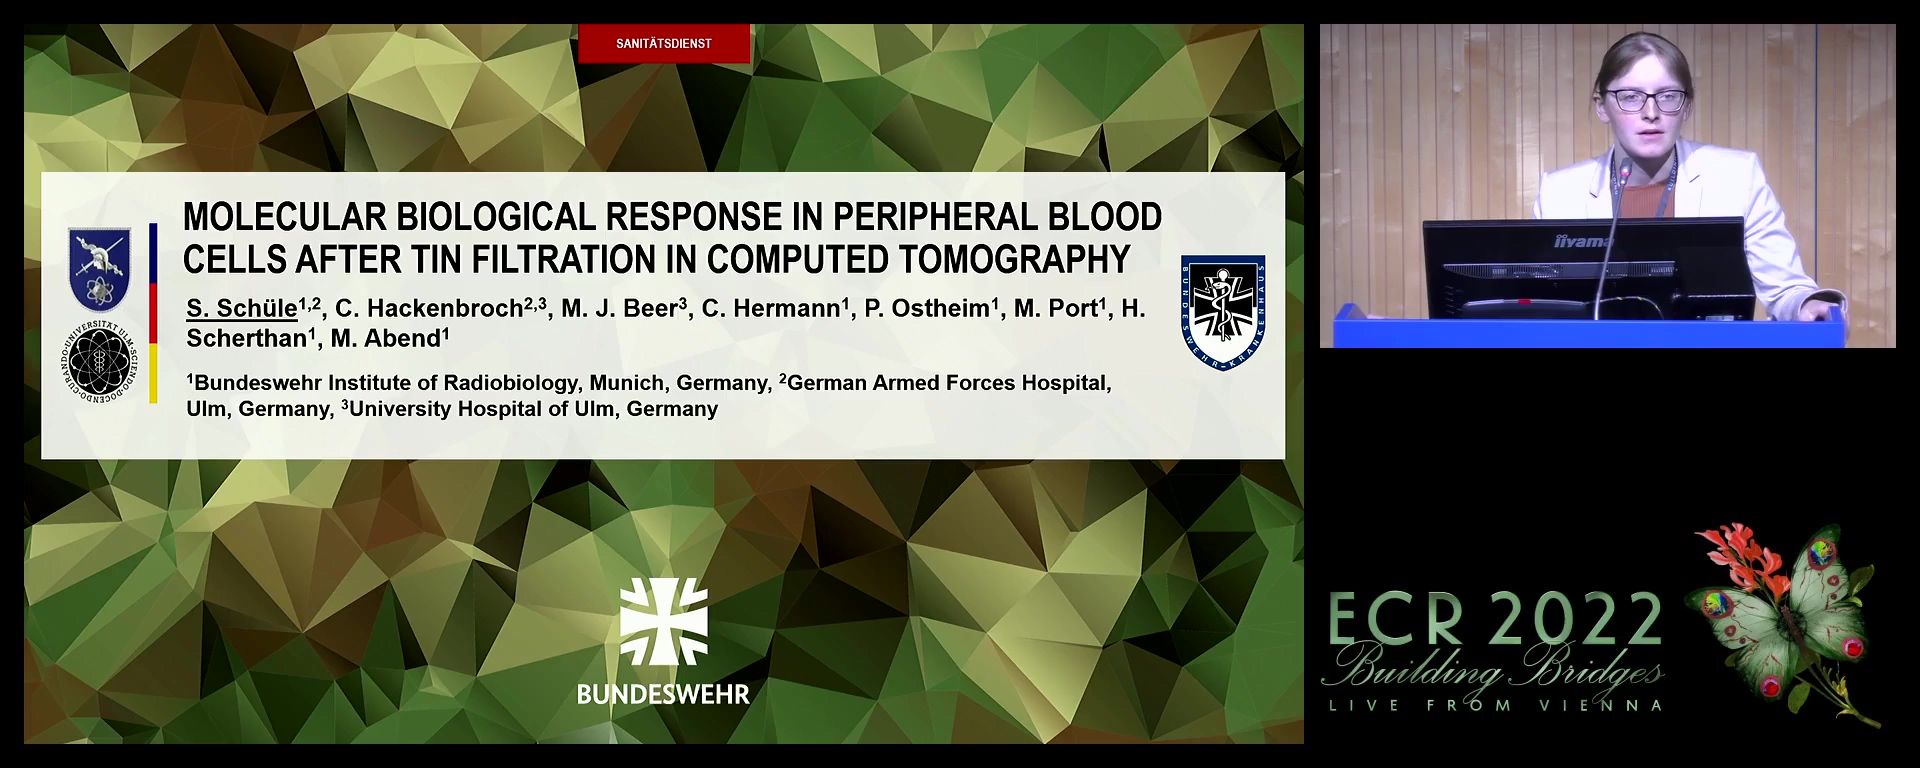 Molecular biological response in peripheral blood cells after tin filtration in computed tomography - Simone Schüle, Munich / DE